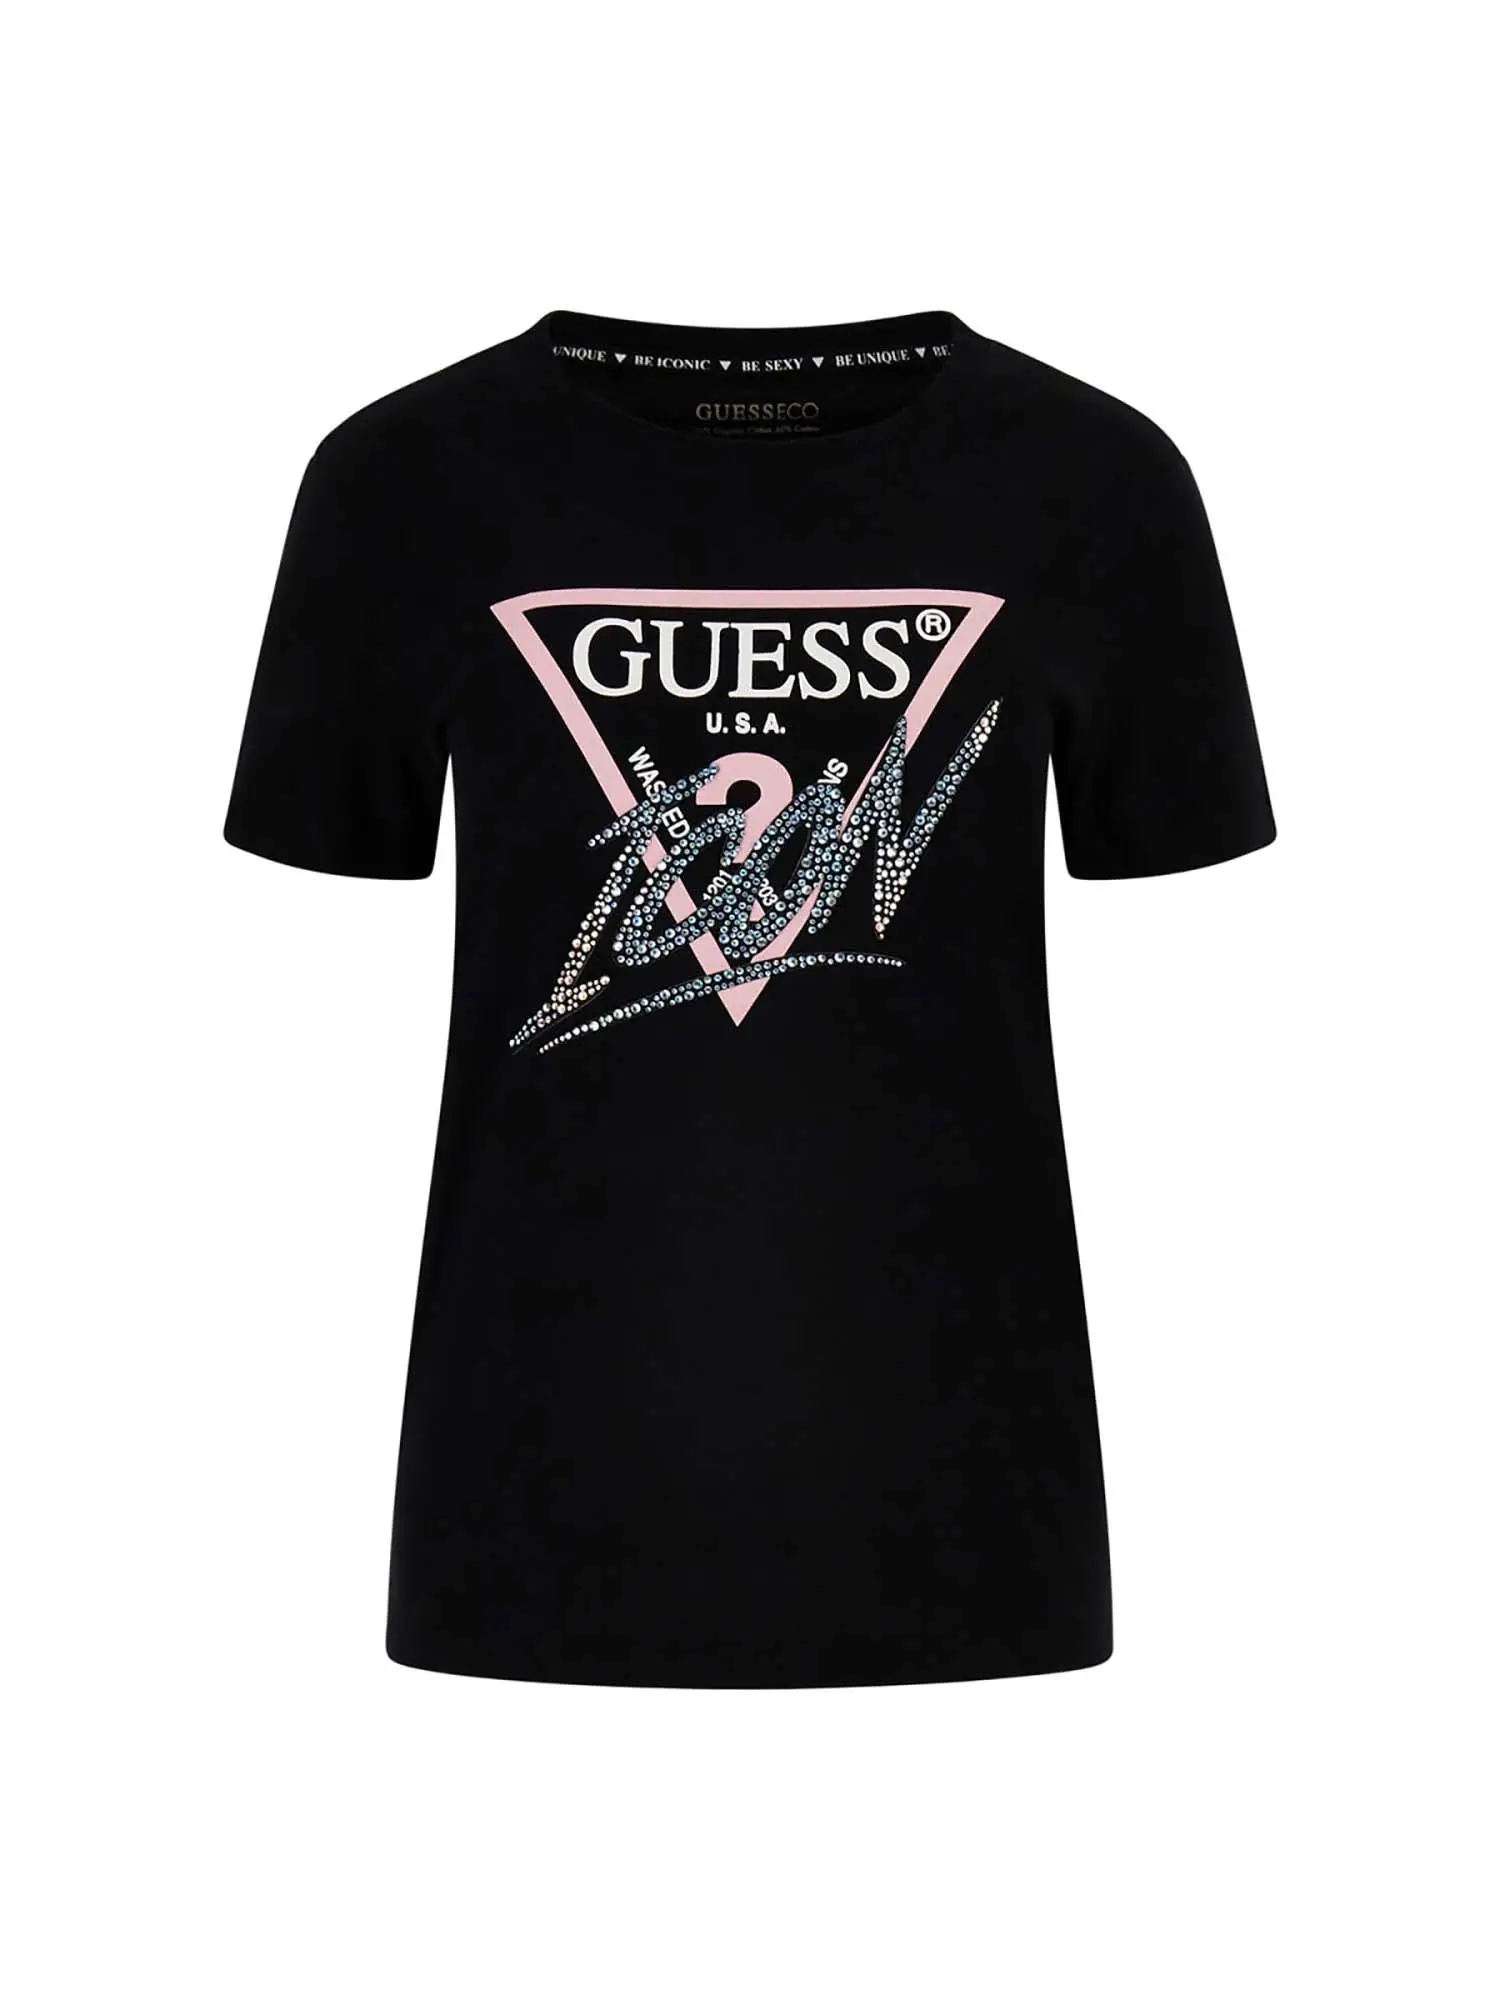 T-SHIRT DONNA - GUESS JEANS - W4RI41 I3Z14 - NERO, S